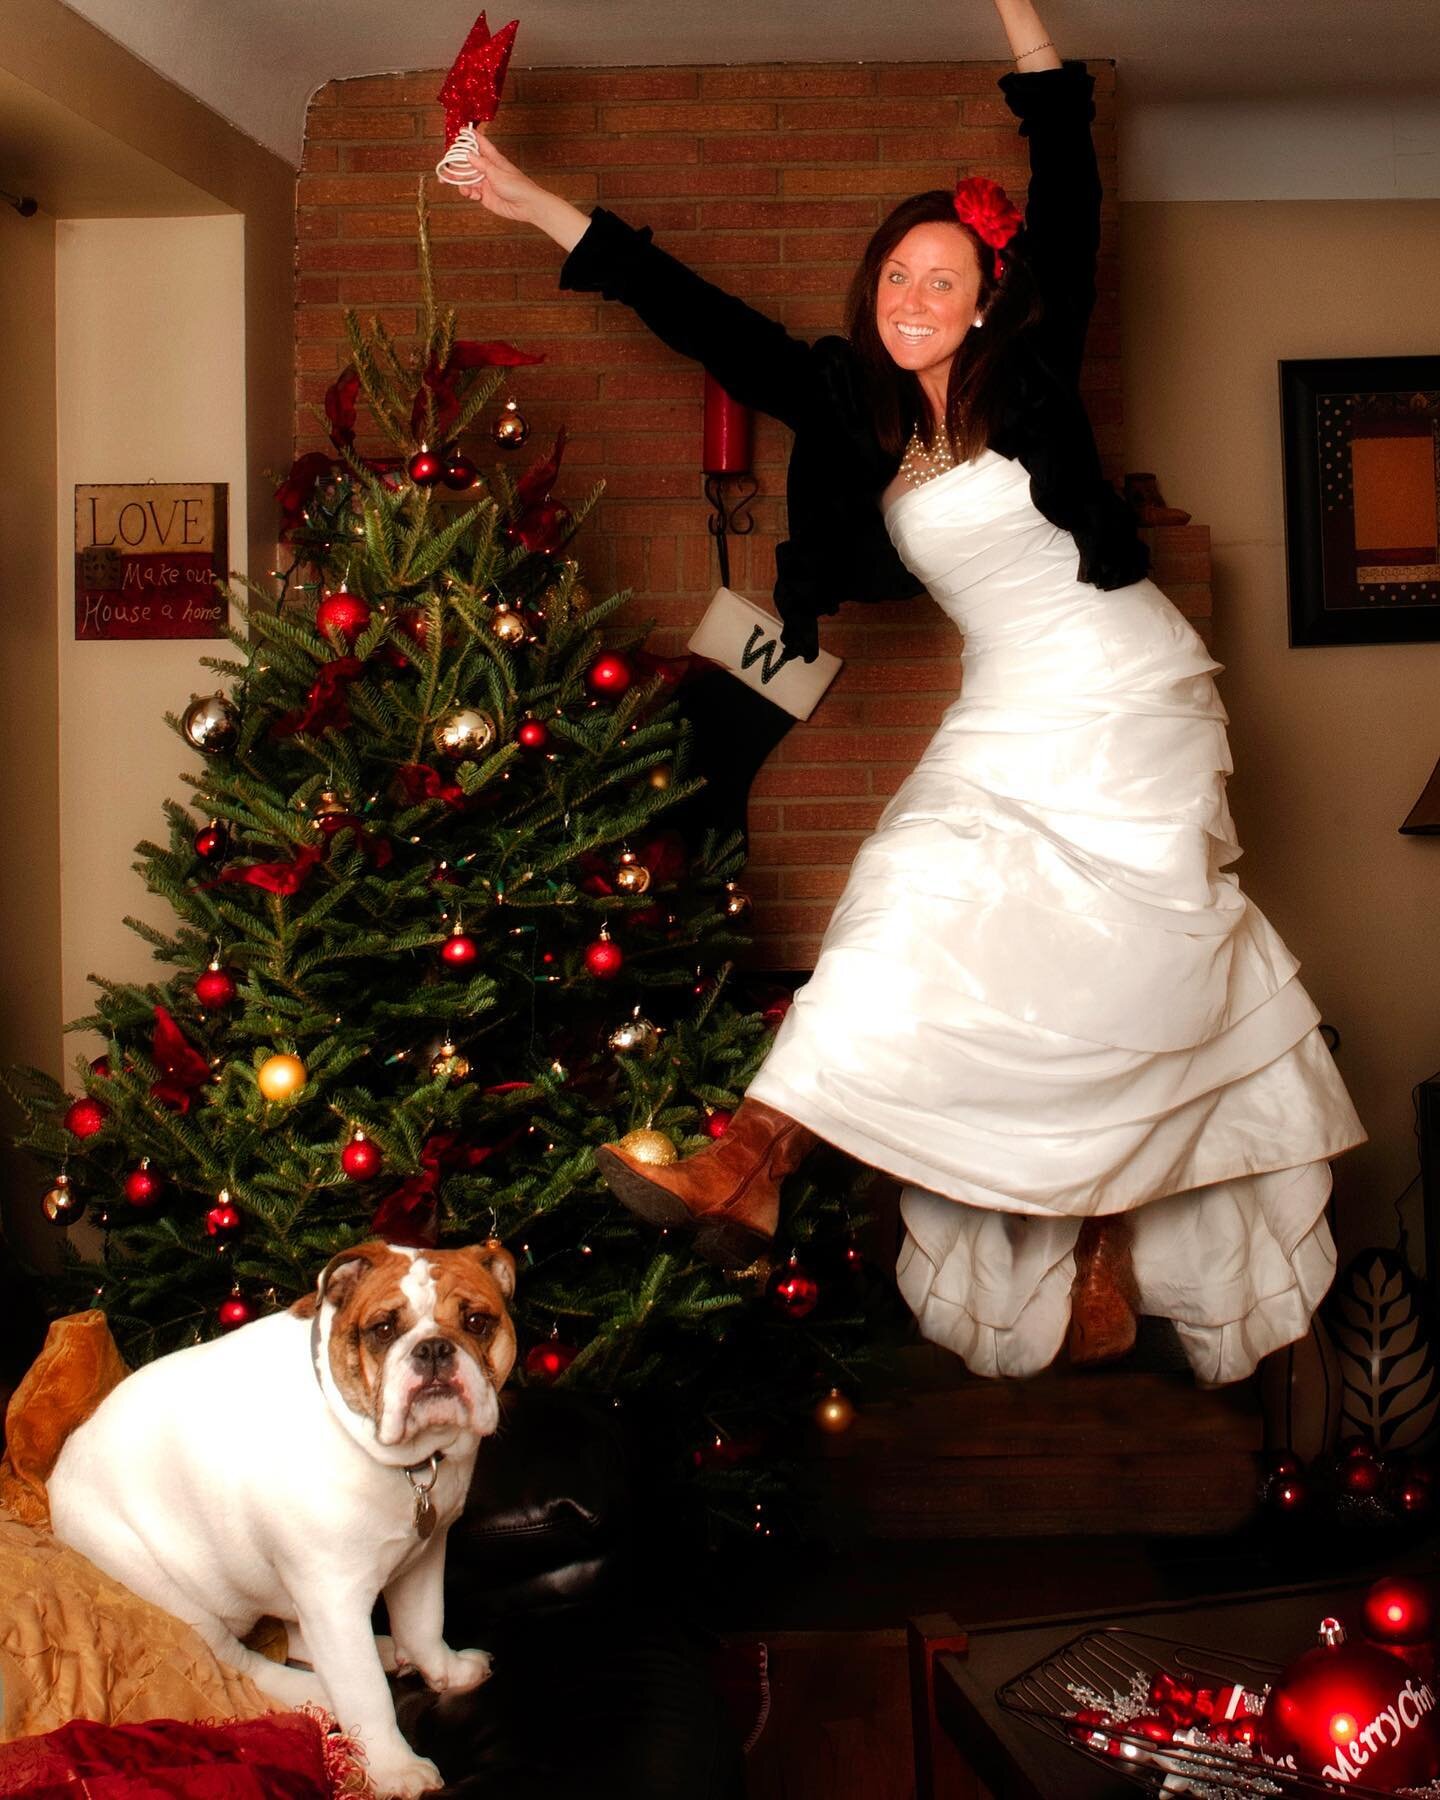 Comedians at home: Raleigh Weld! Decorating her tree in her favorite dress with her favorite pal Sarge